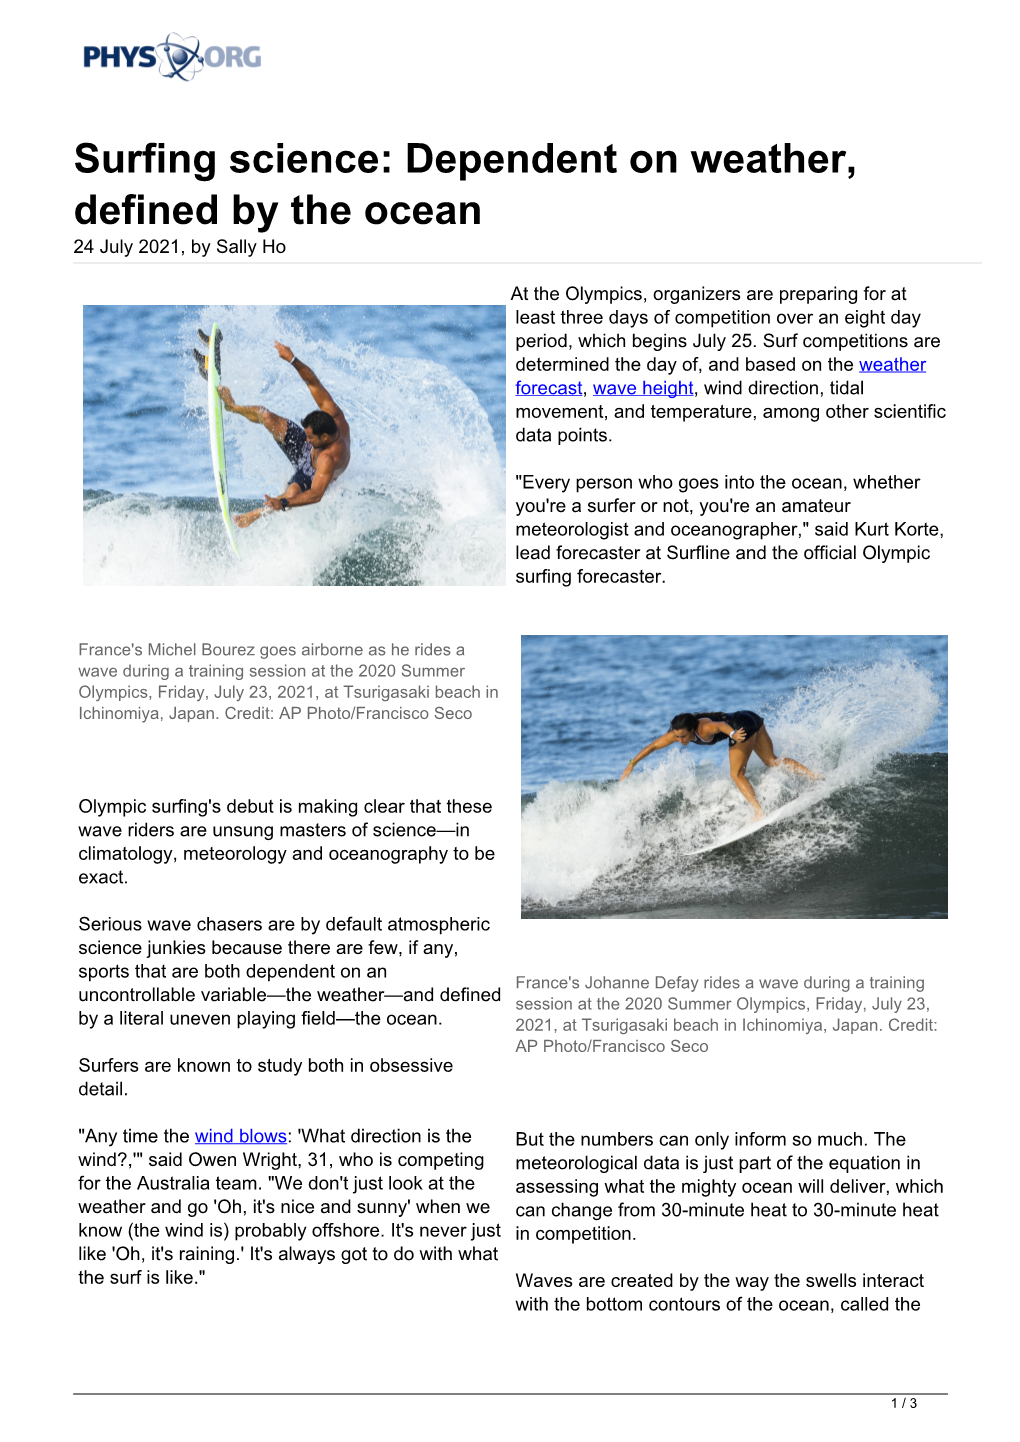 Surfing Science: Dependent on Weather, Defined by the Ocean 24 July 2021, by Sally Ho